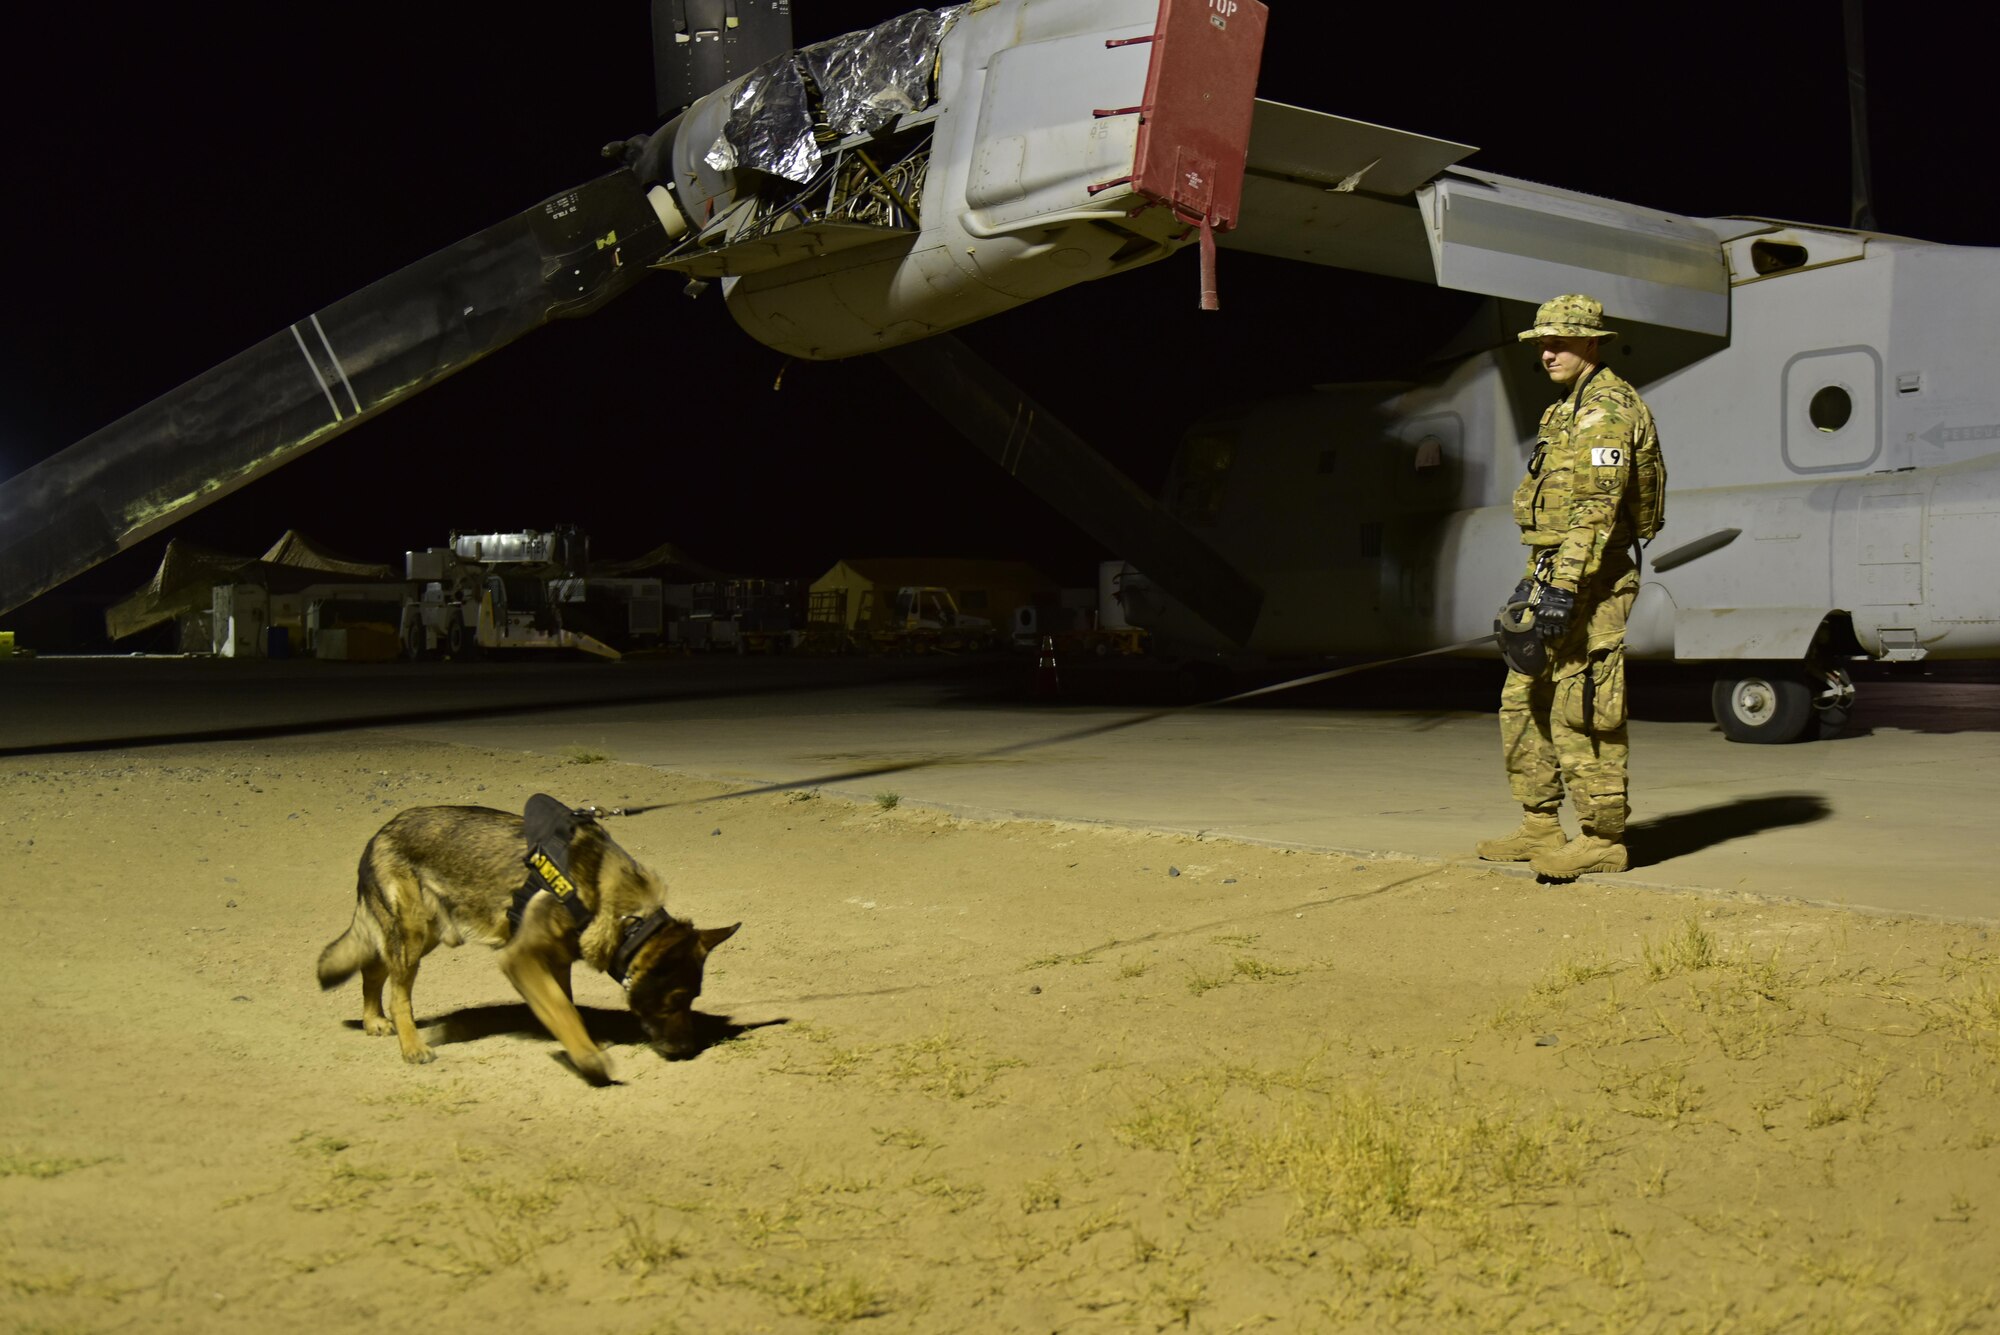 Senior Airman Carlton Isaacson, 407th Expeditionary Security Forces military working dog handler,and Egon, 407th ESFS military working dog, conduct a flightline perimeter walk May 23, 2017, at the 407th Air Expeditionary Group in Southwest Asia. Isaacson and Egon have been partnered for approximately a year and a half. (U.S. Air Force photo by Senior Airman Ramon A. Adelan)